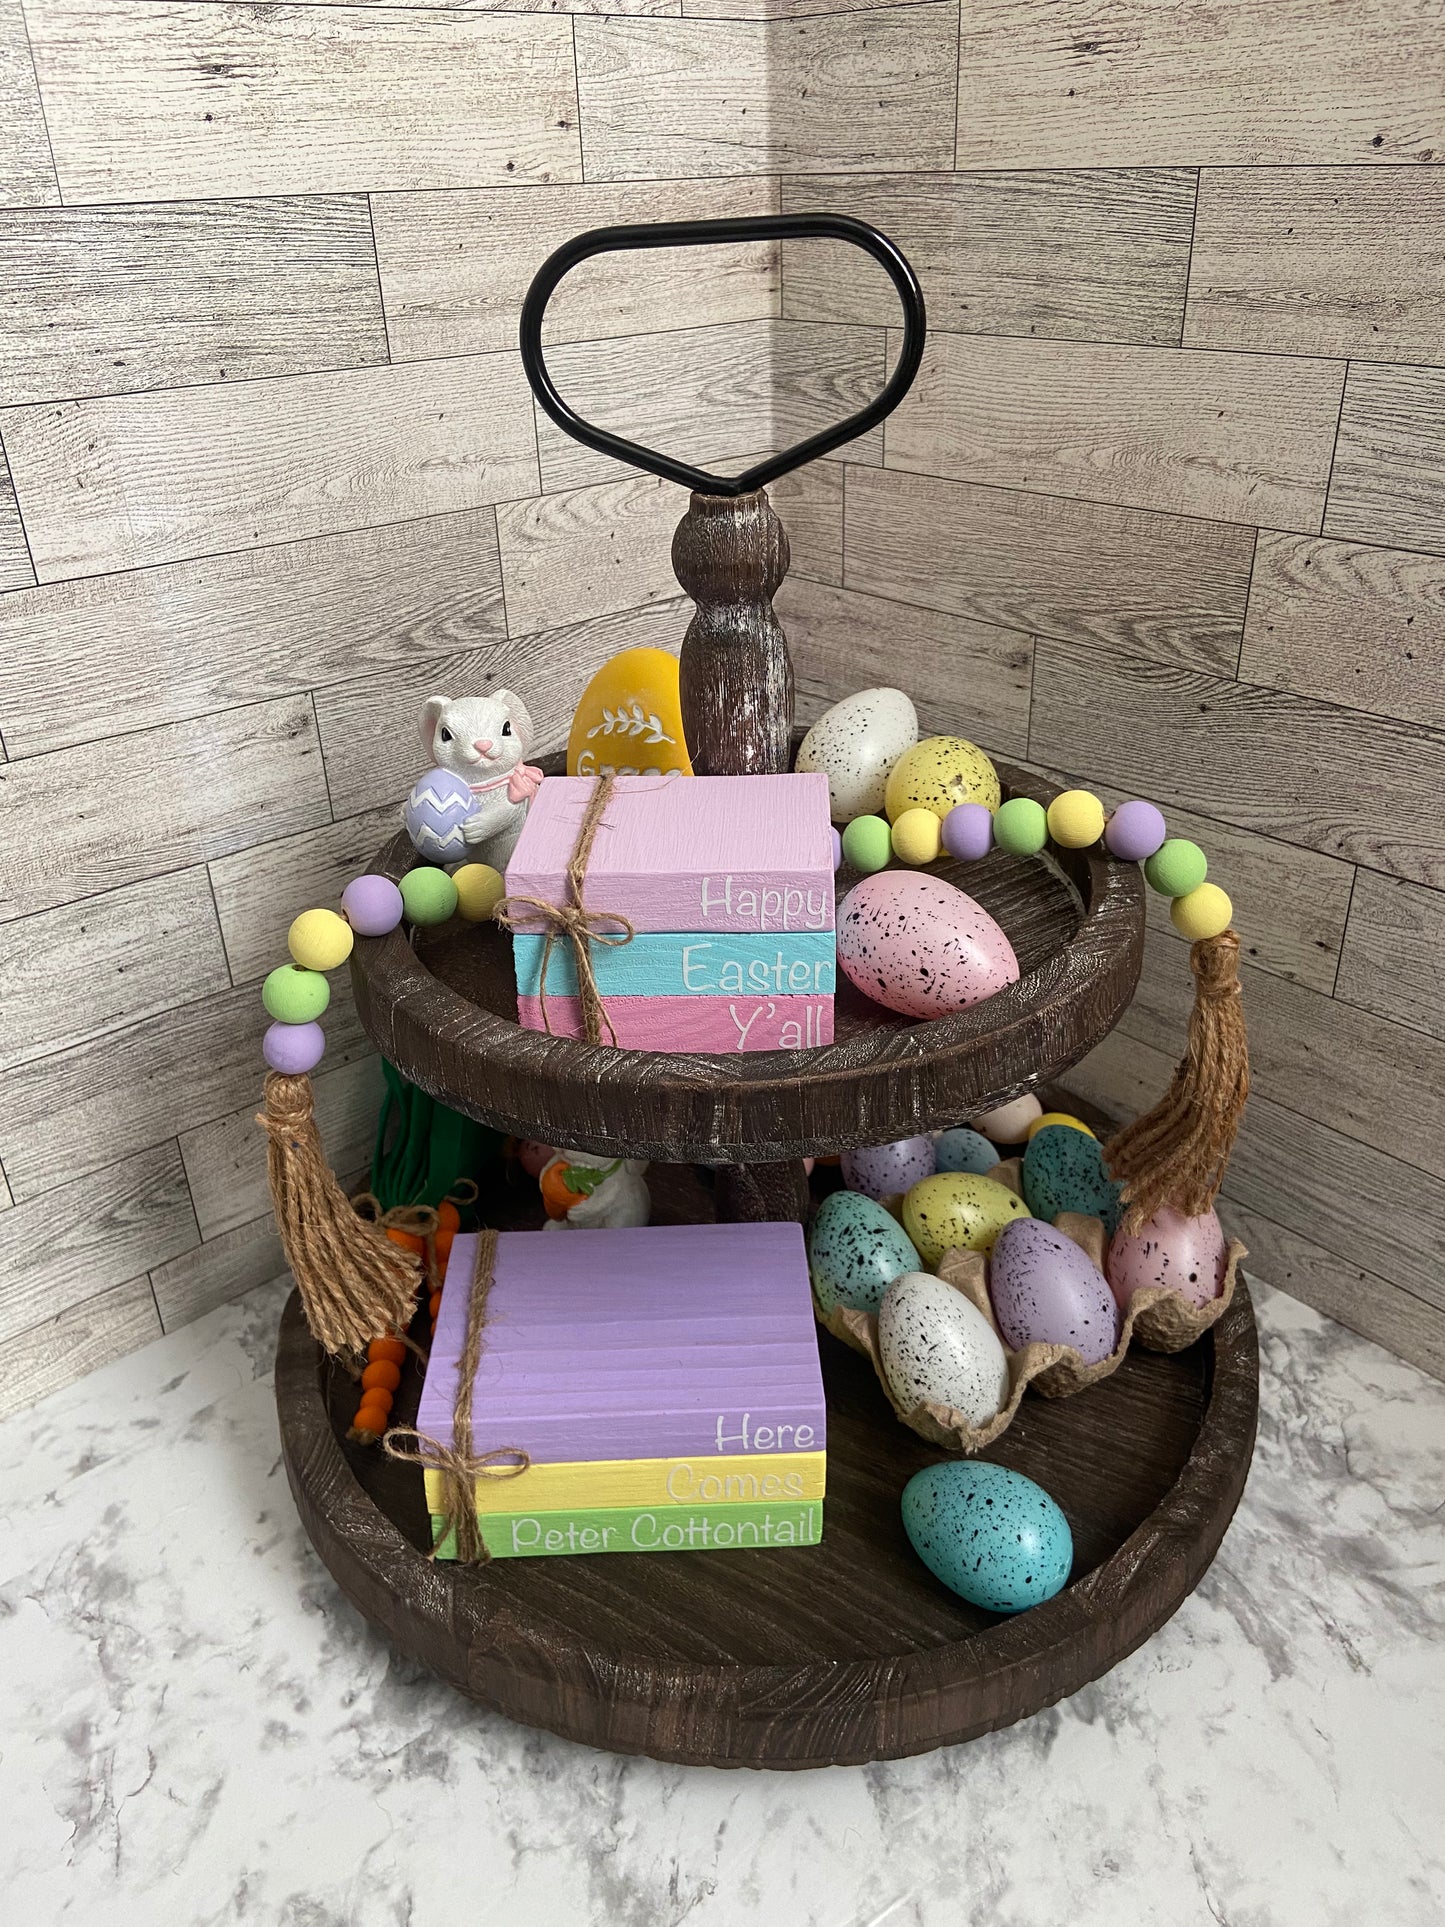 Here Come Peter Cottontail - Large Book Stack